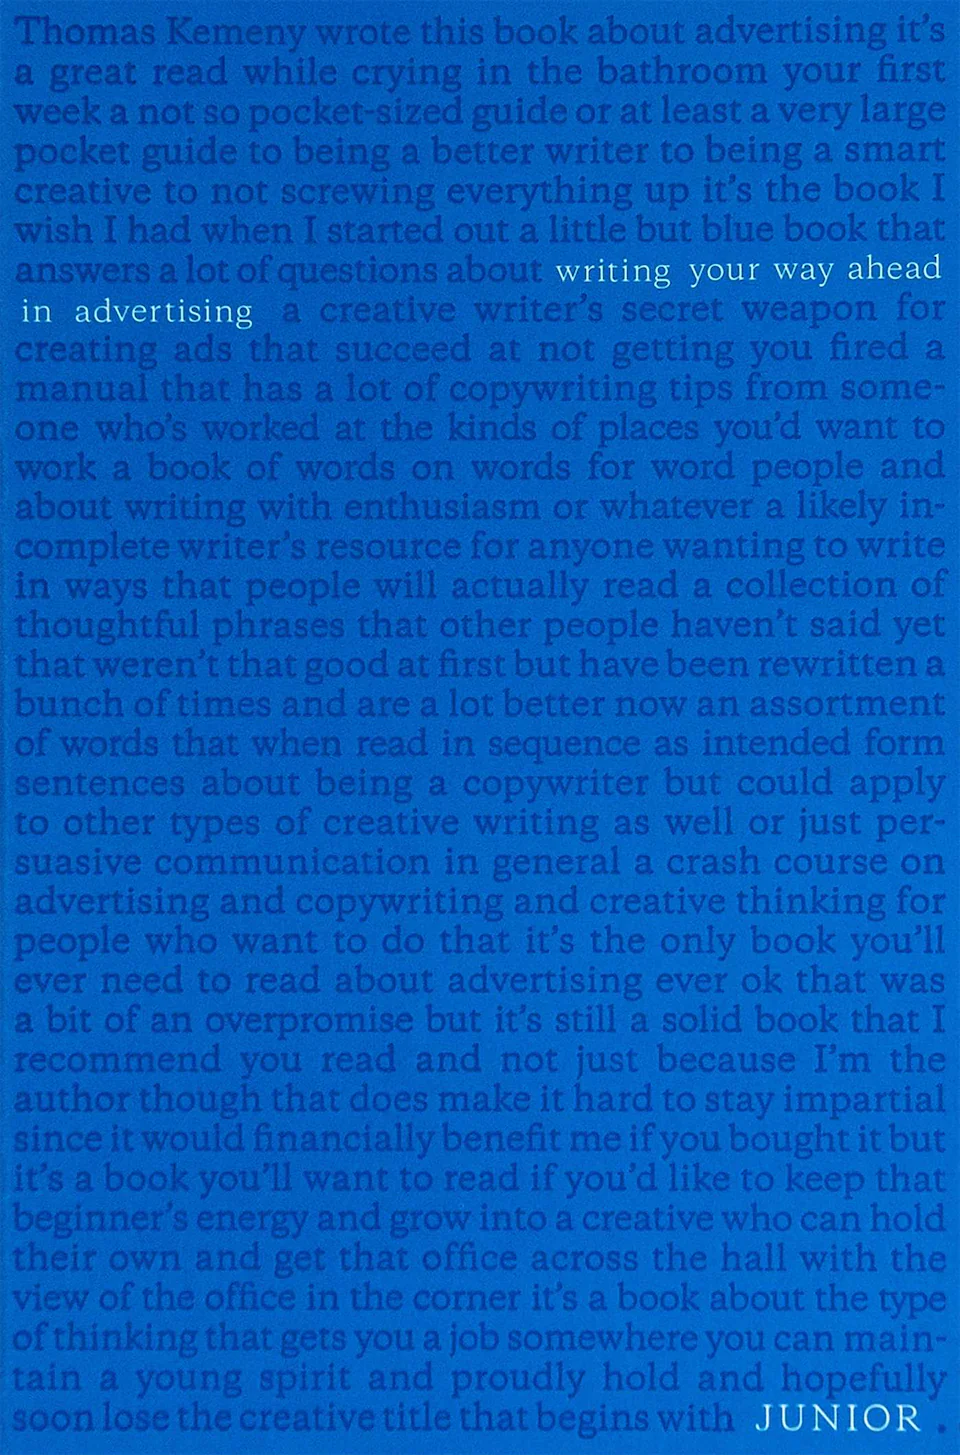 Junior: Writing Your Way Ahead in Advertising by Thomas Kemeny finished on 2022 Oct 16